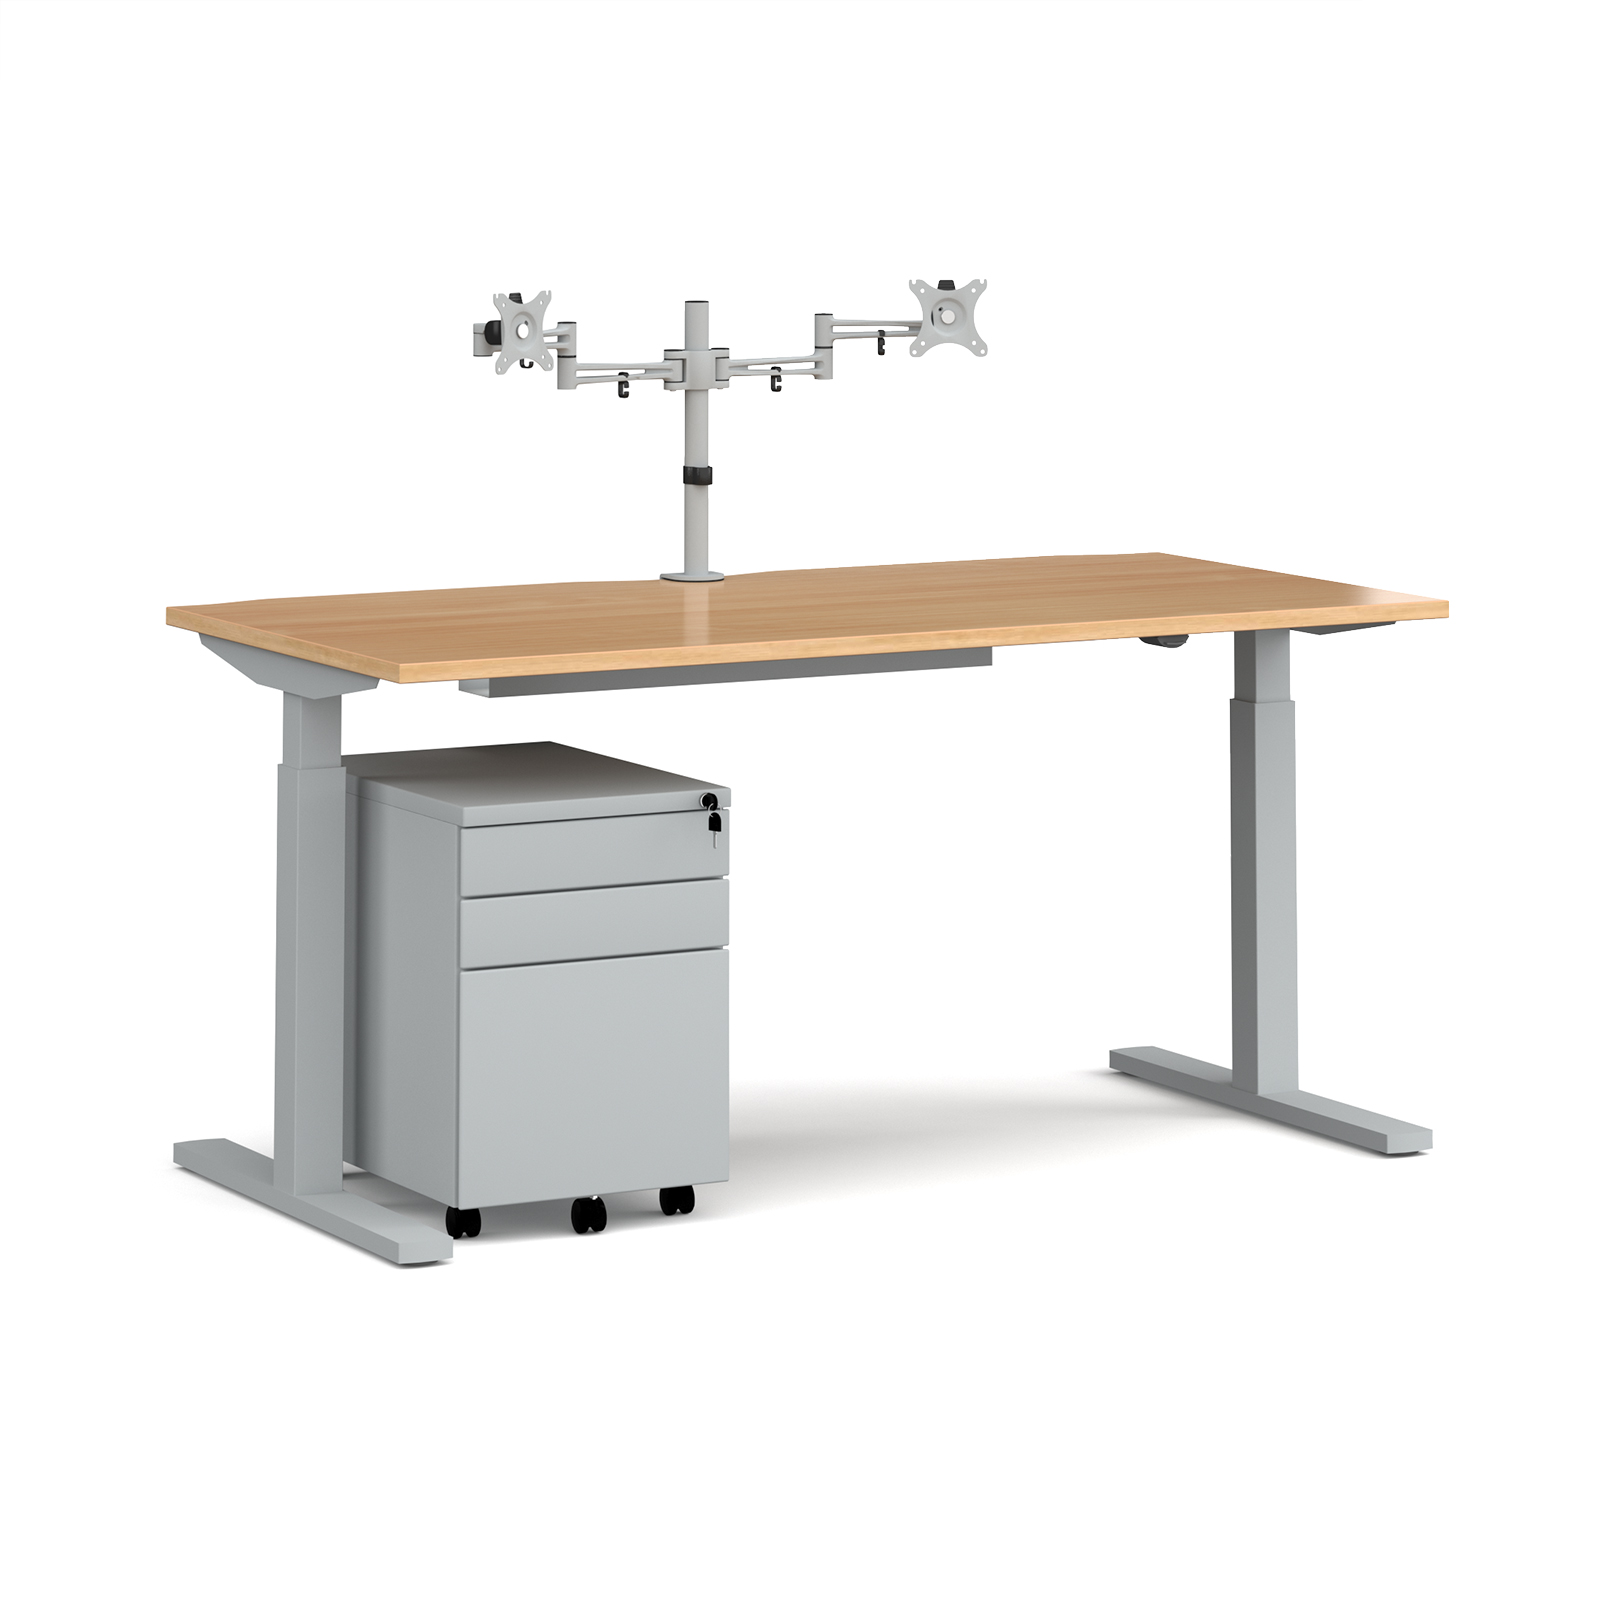 Elev8 Mono straight sit-stand desk 1600mm - silver frame, beech top with matching double monitor arm, steel pedestal and cable tray